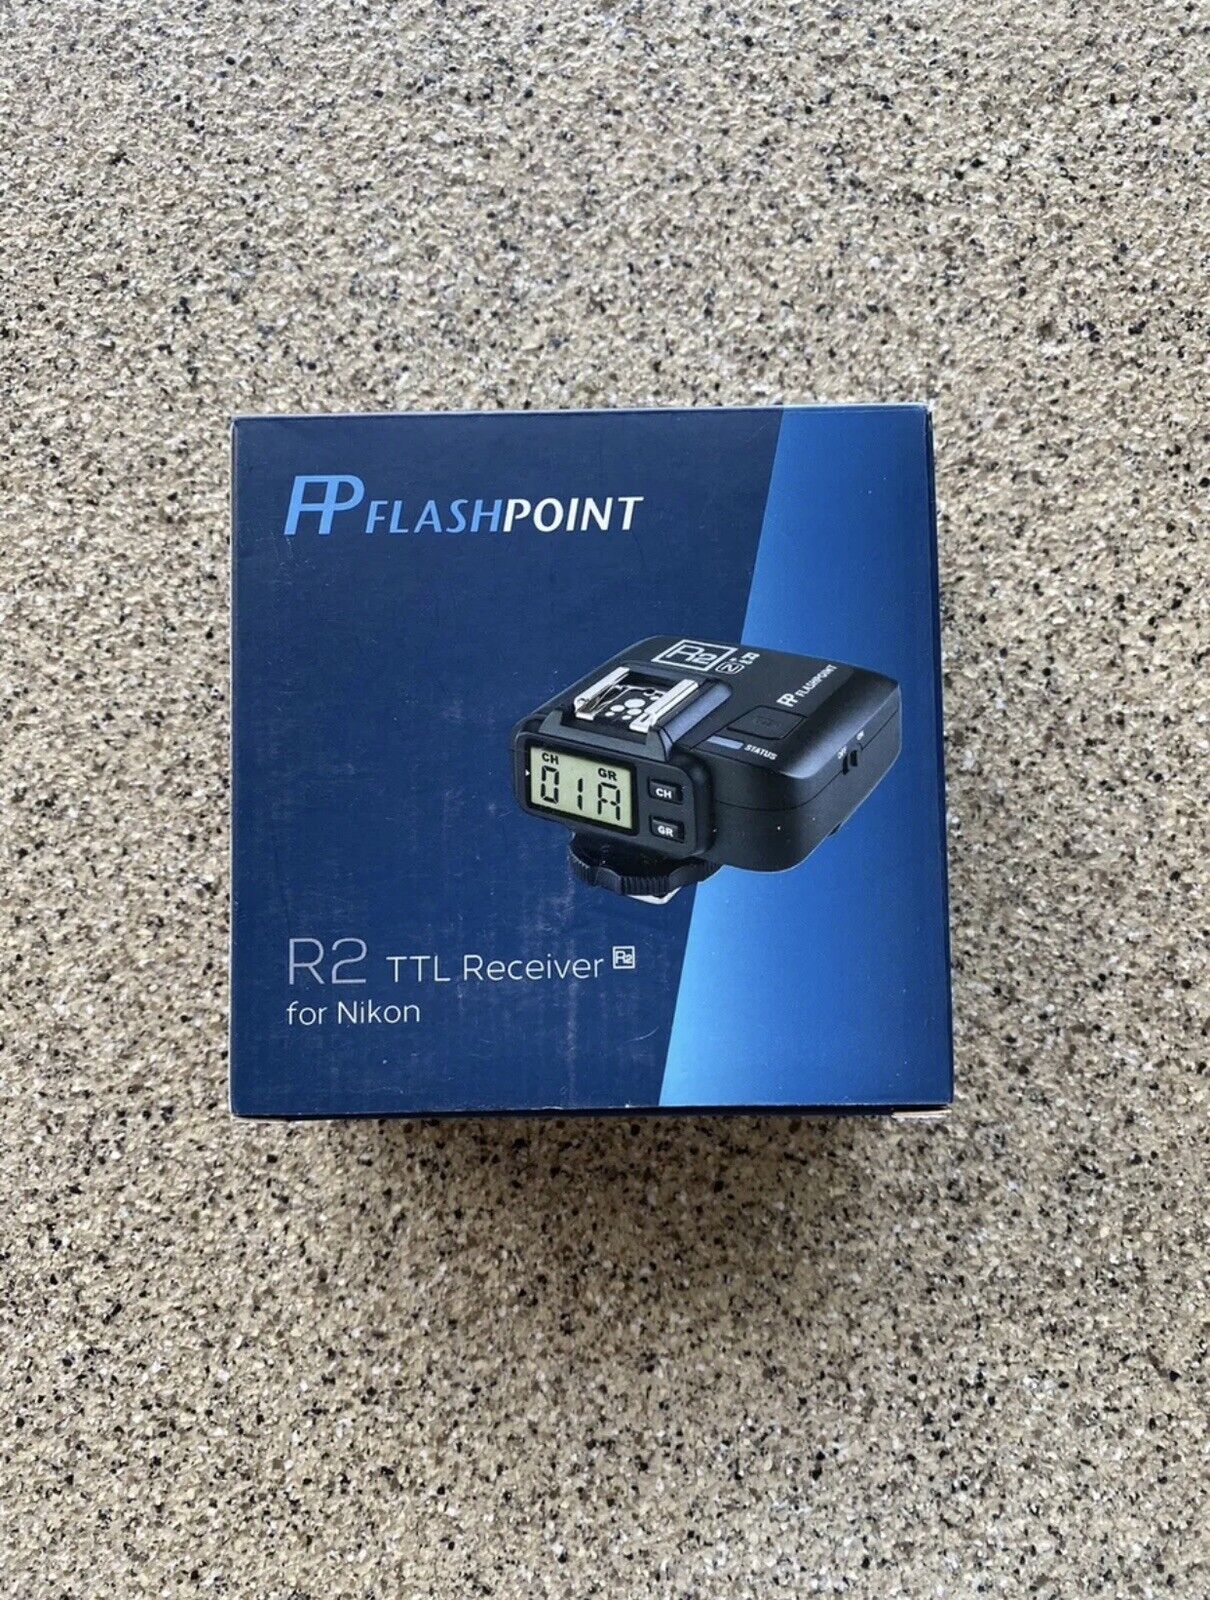 Flashpoint R2 Ttl Receiver For Nikon New In Box